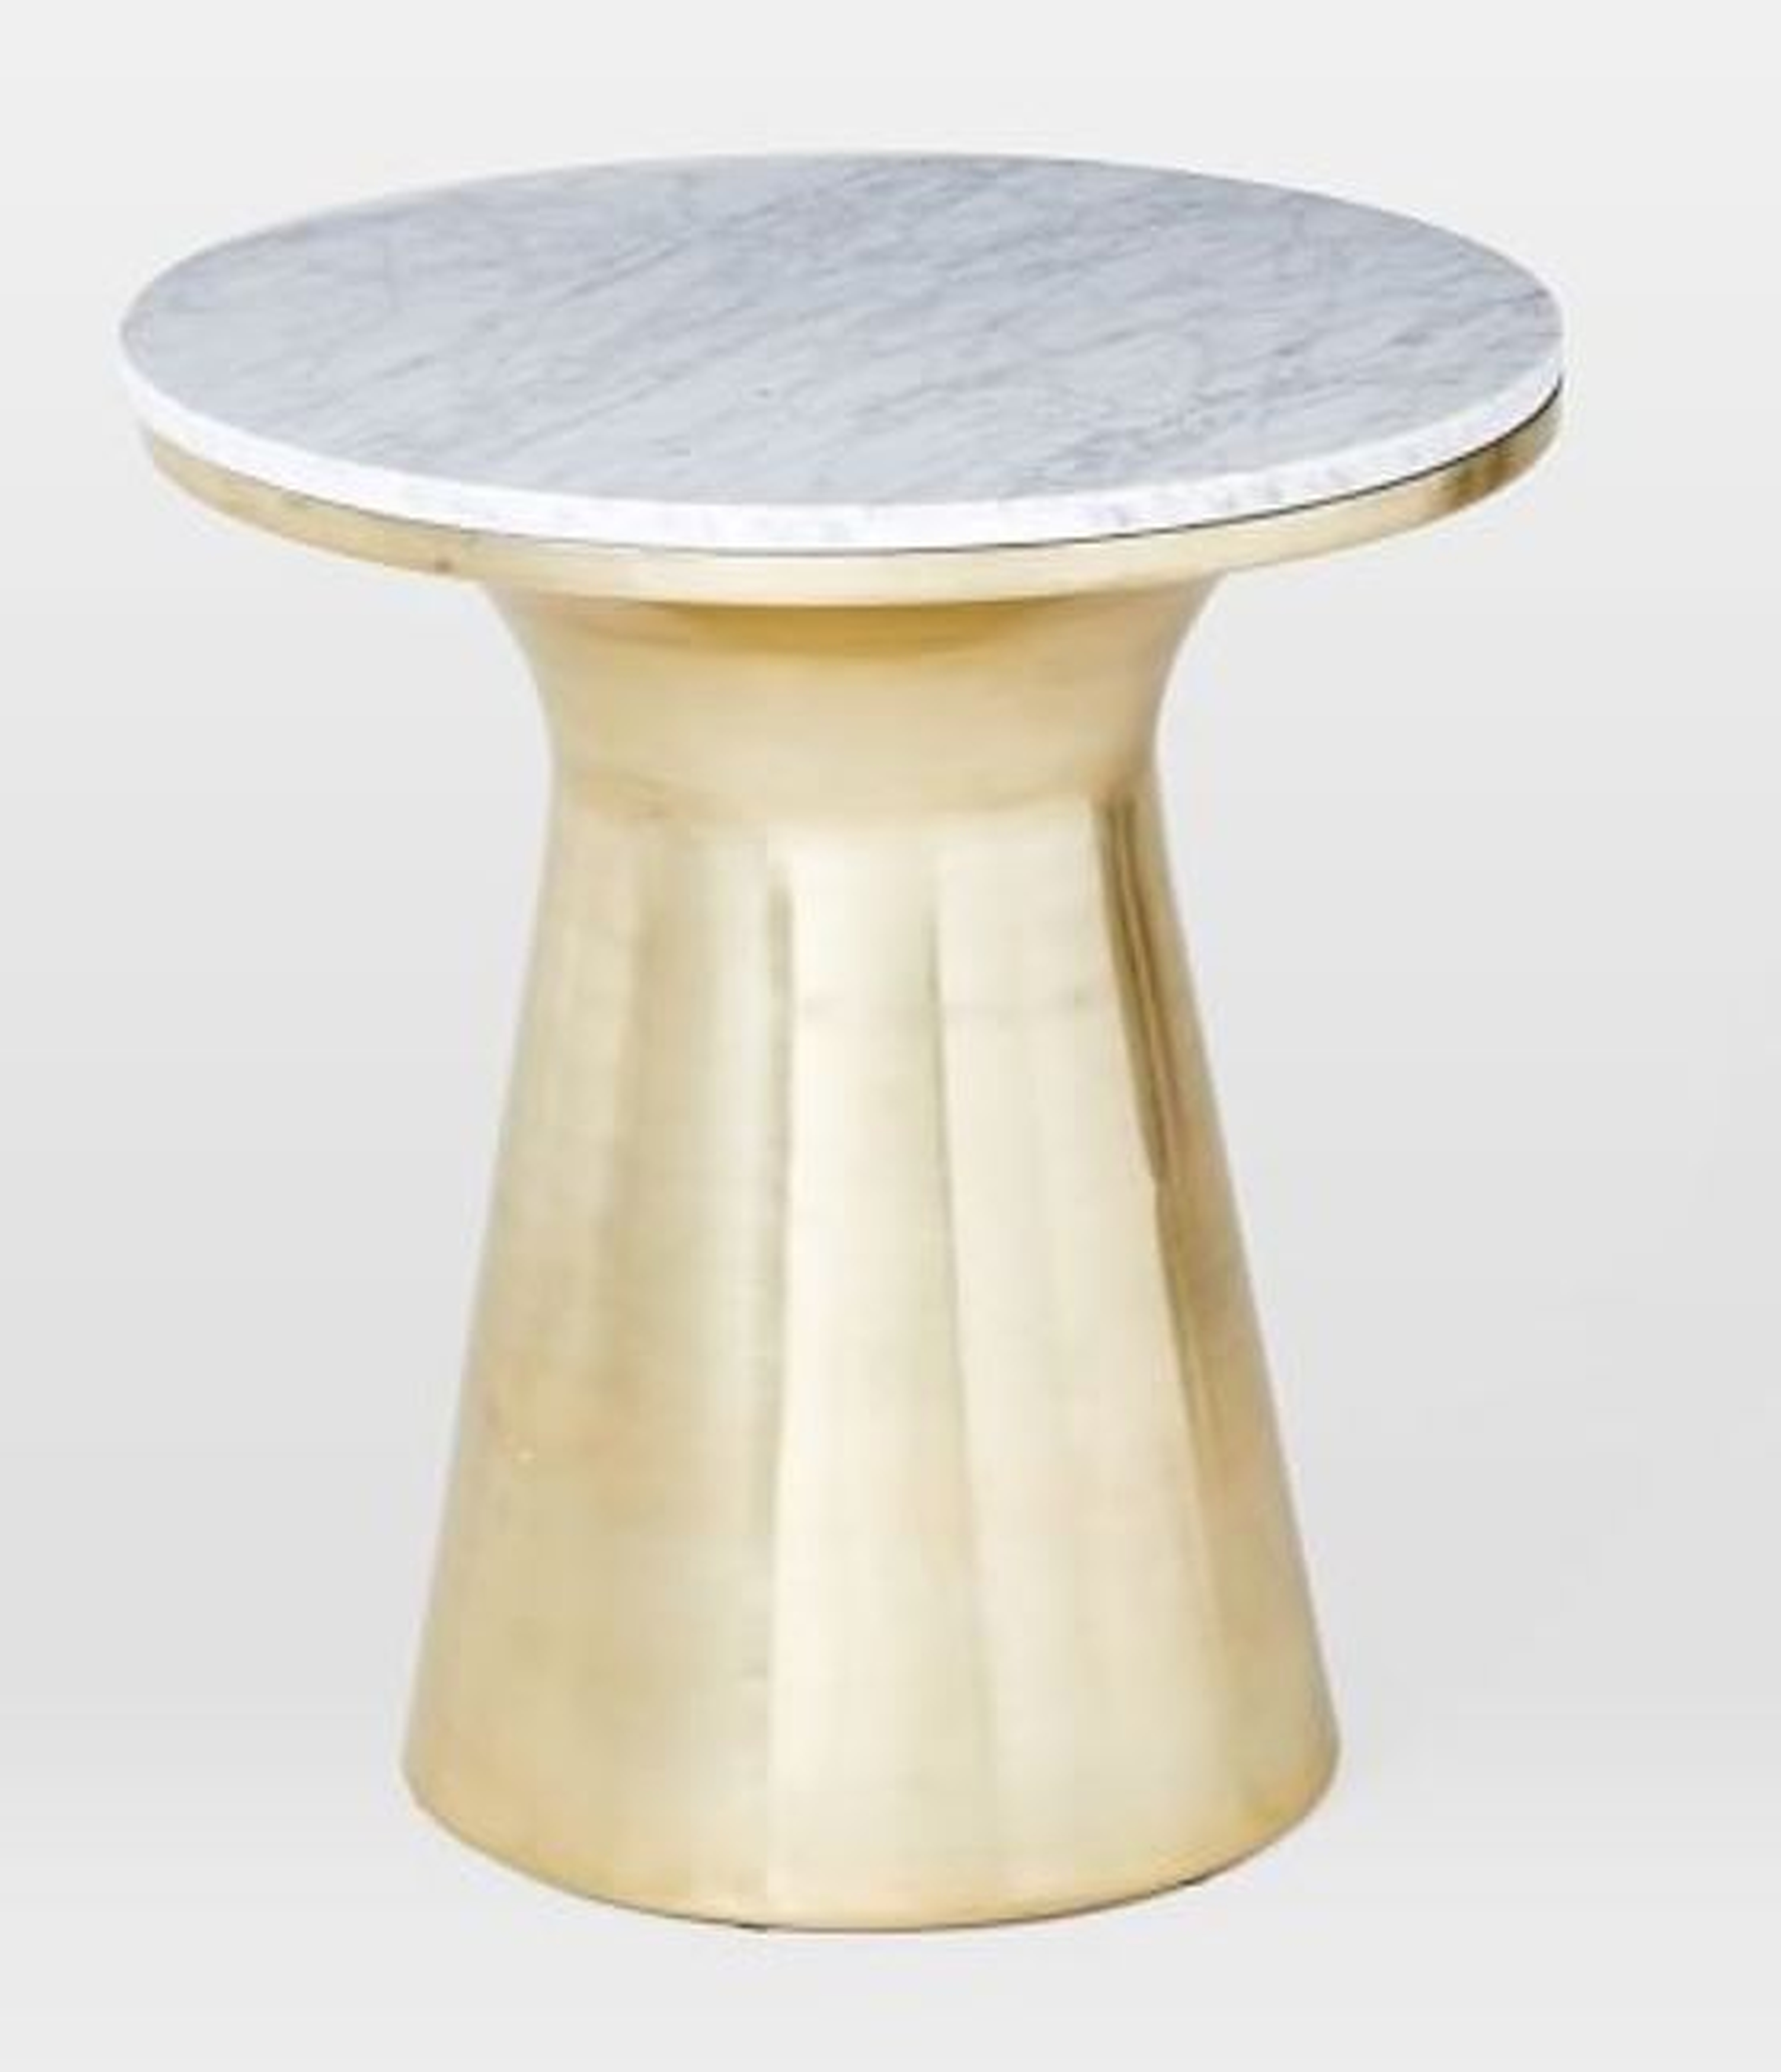 Marble Topped Pedestal Side Table - White Marble/Antique Brass - West Elm